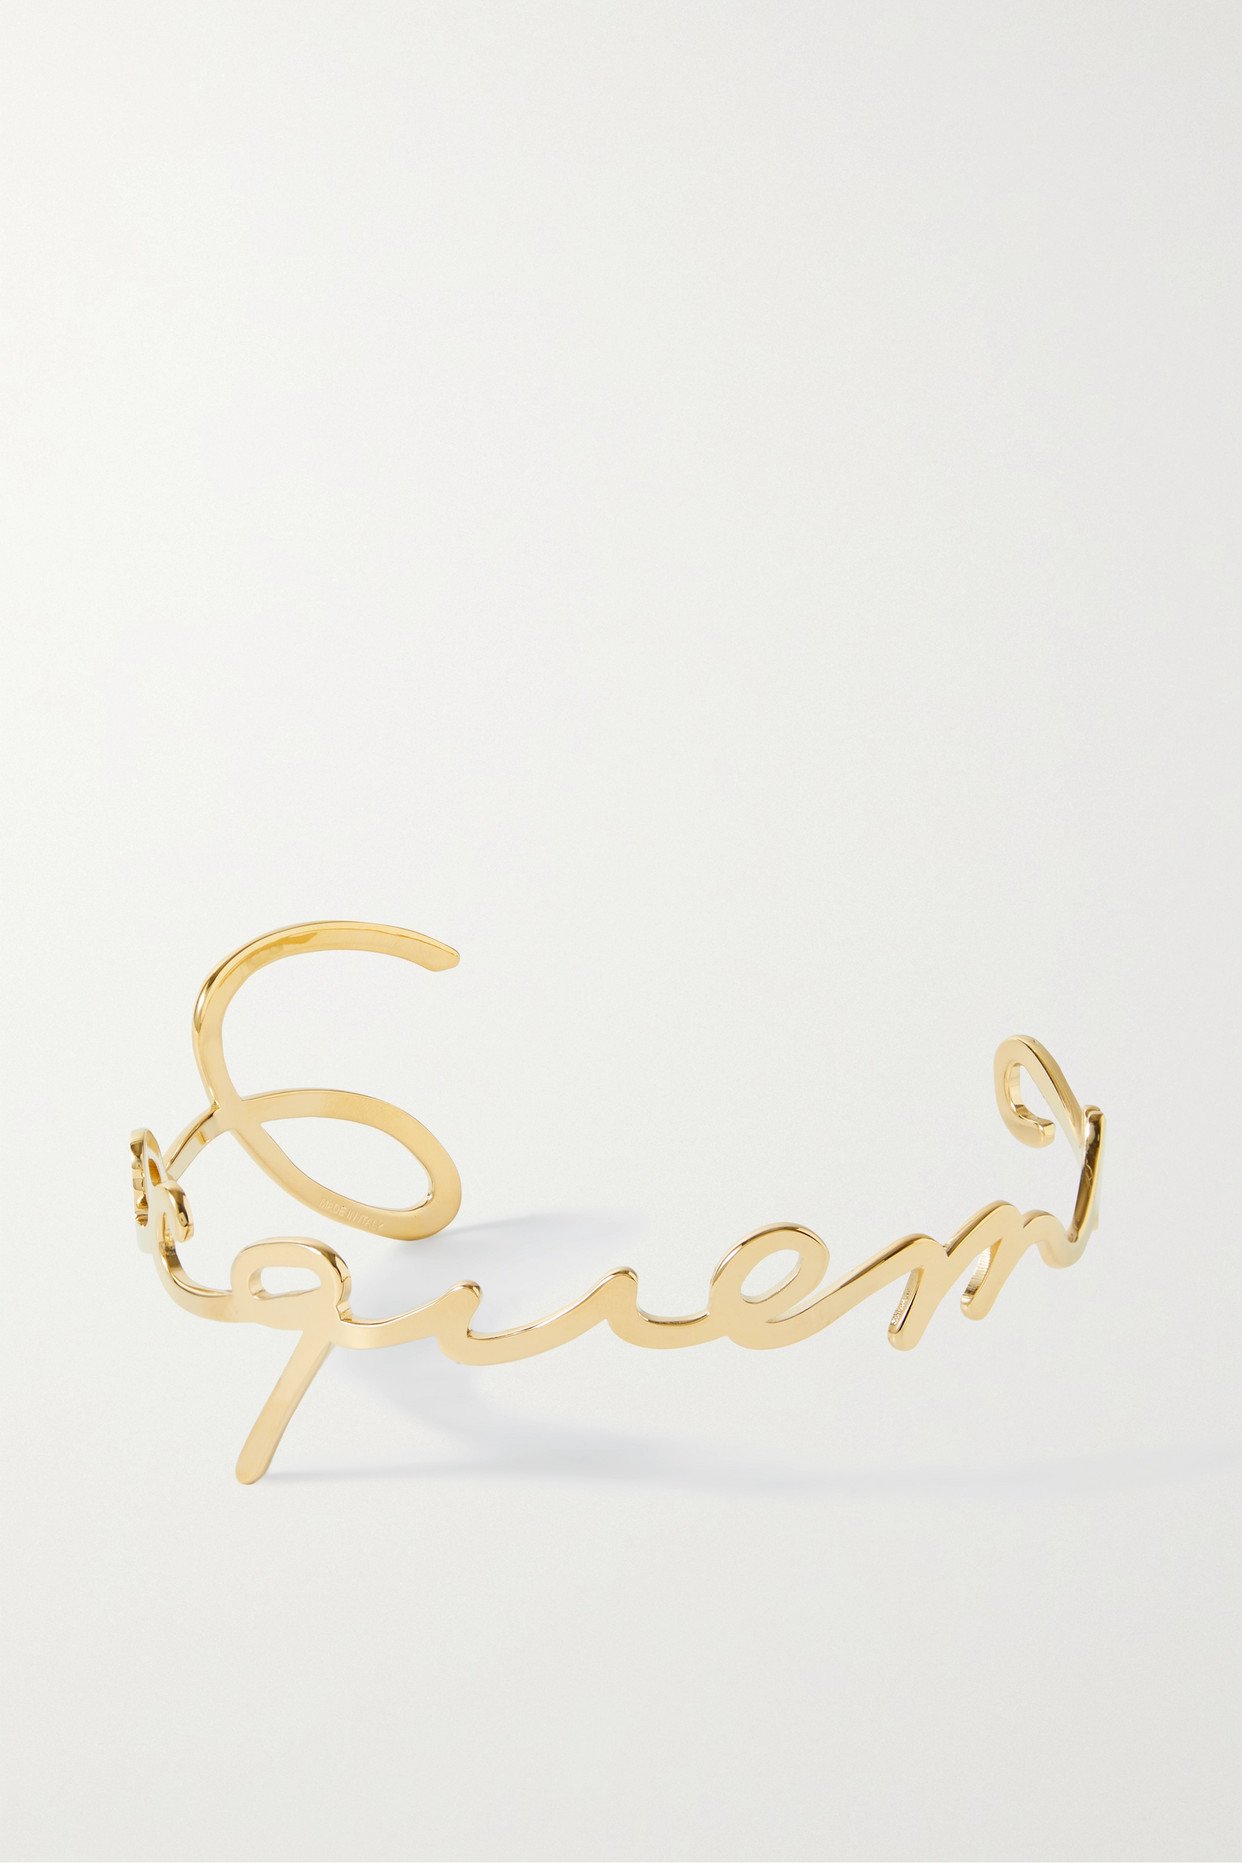 JACQUEMUS Le Collier Signature Gold-Tone Choker in Gold